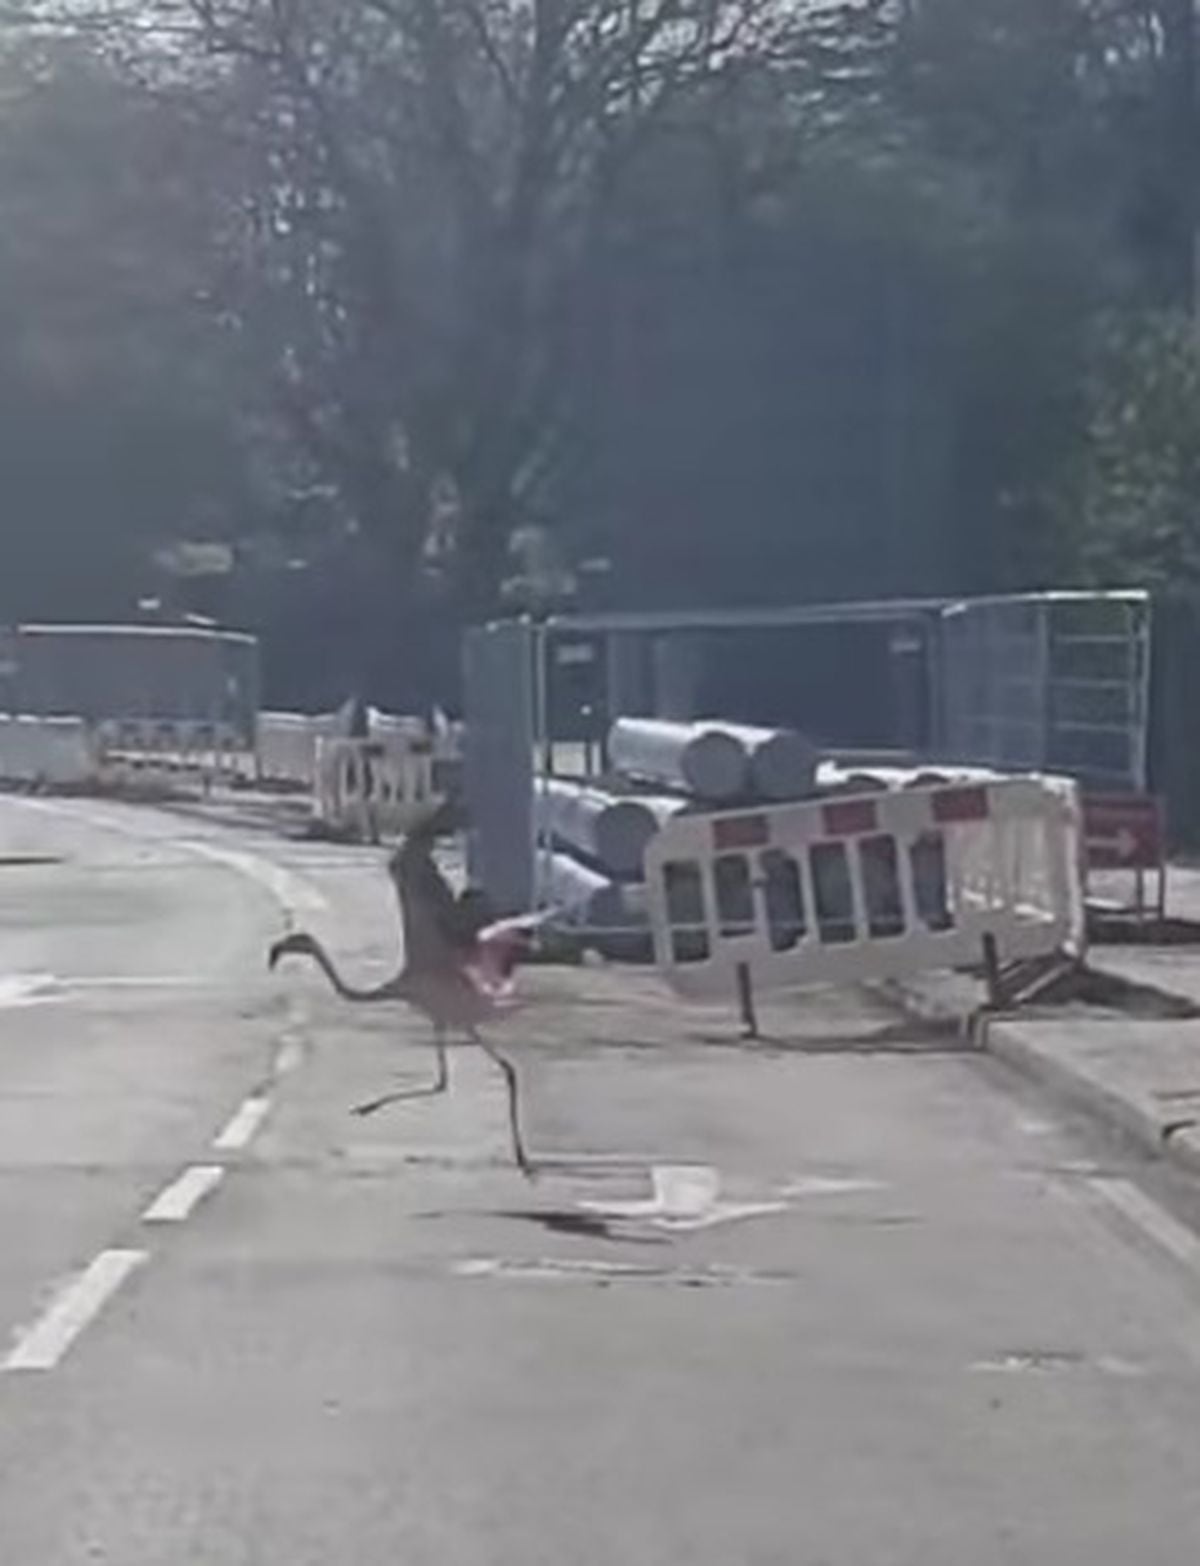 A flamingo from Dudley Zoo was spotted strolling down the main road outside